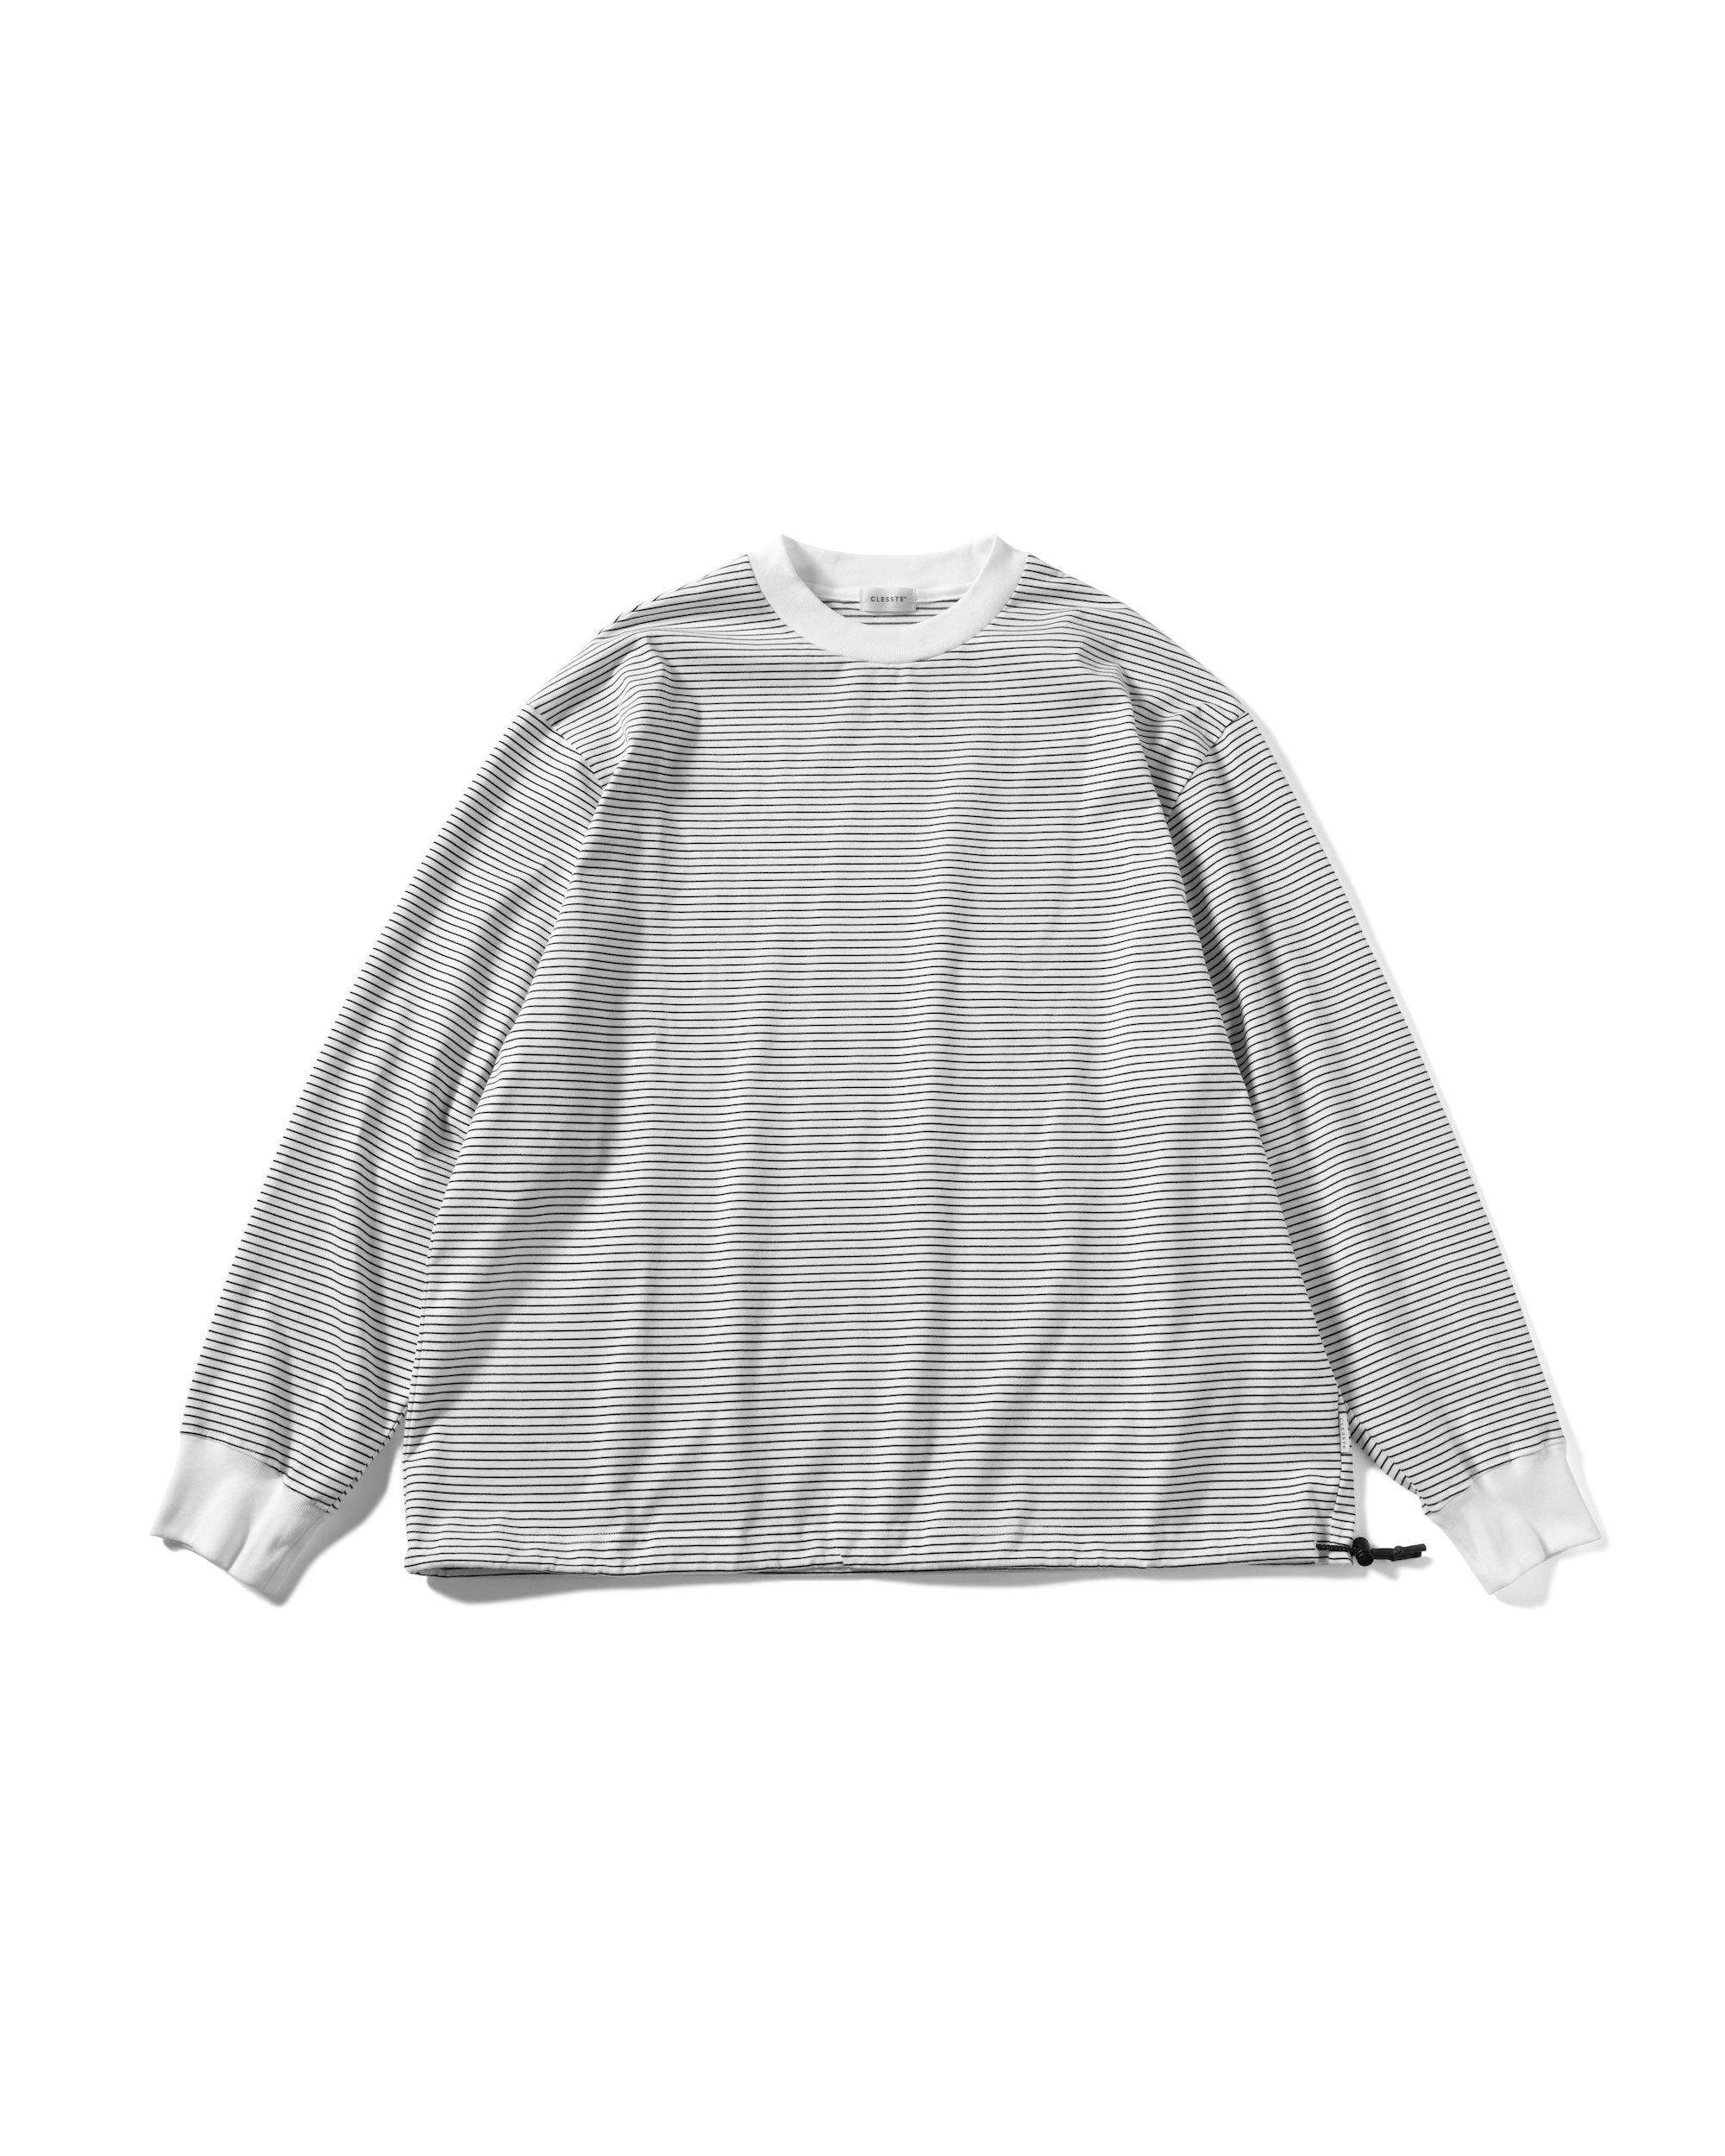 IN STOCK】STRIPED MASSIVE L/S T-SHIRT WITH DRAWSTRINGS